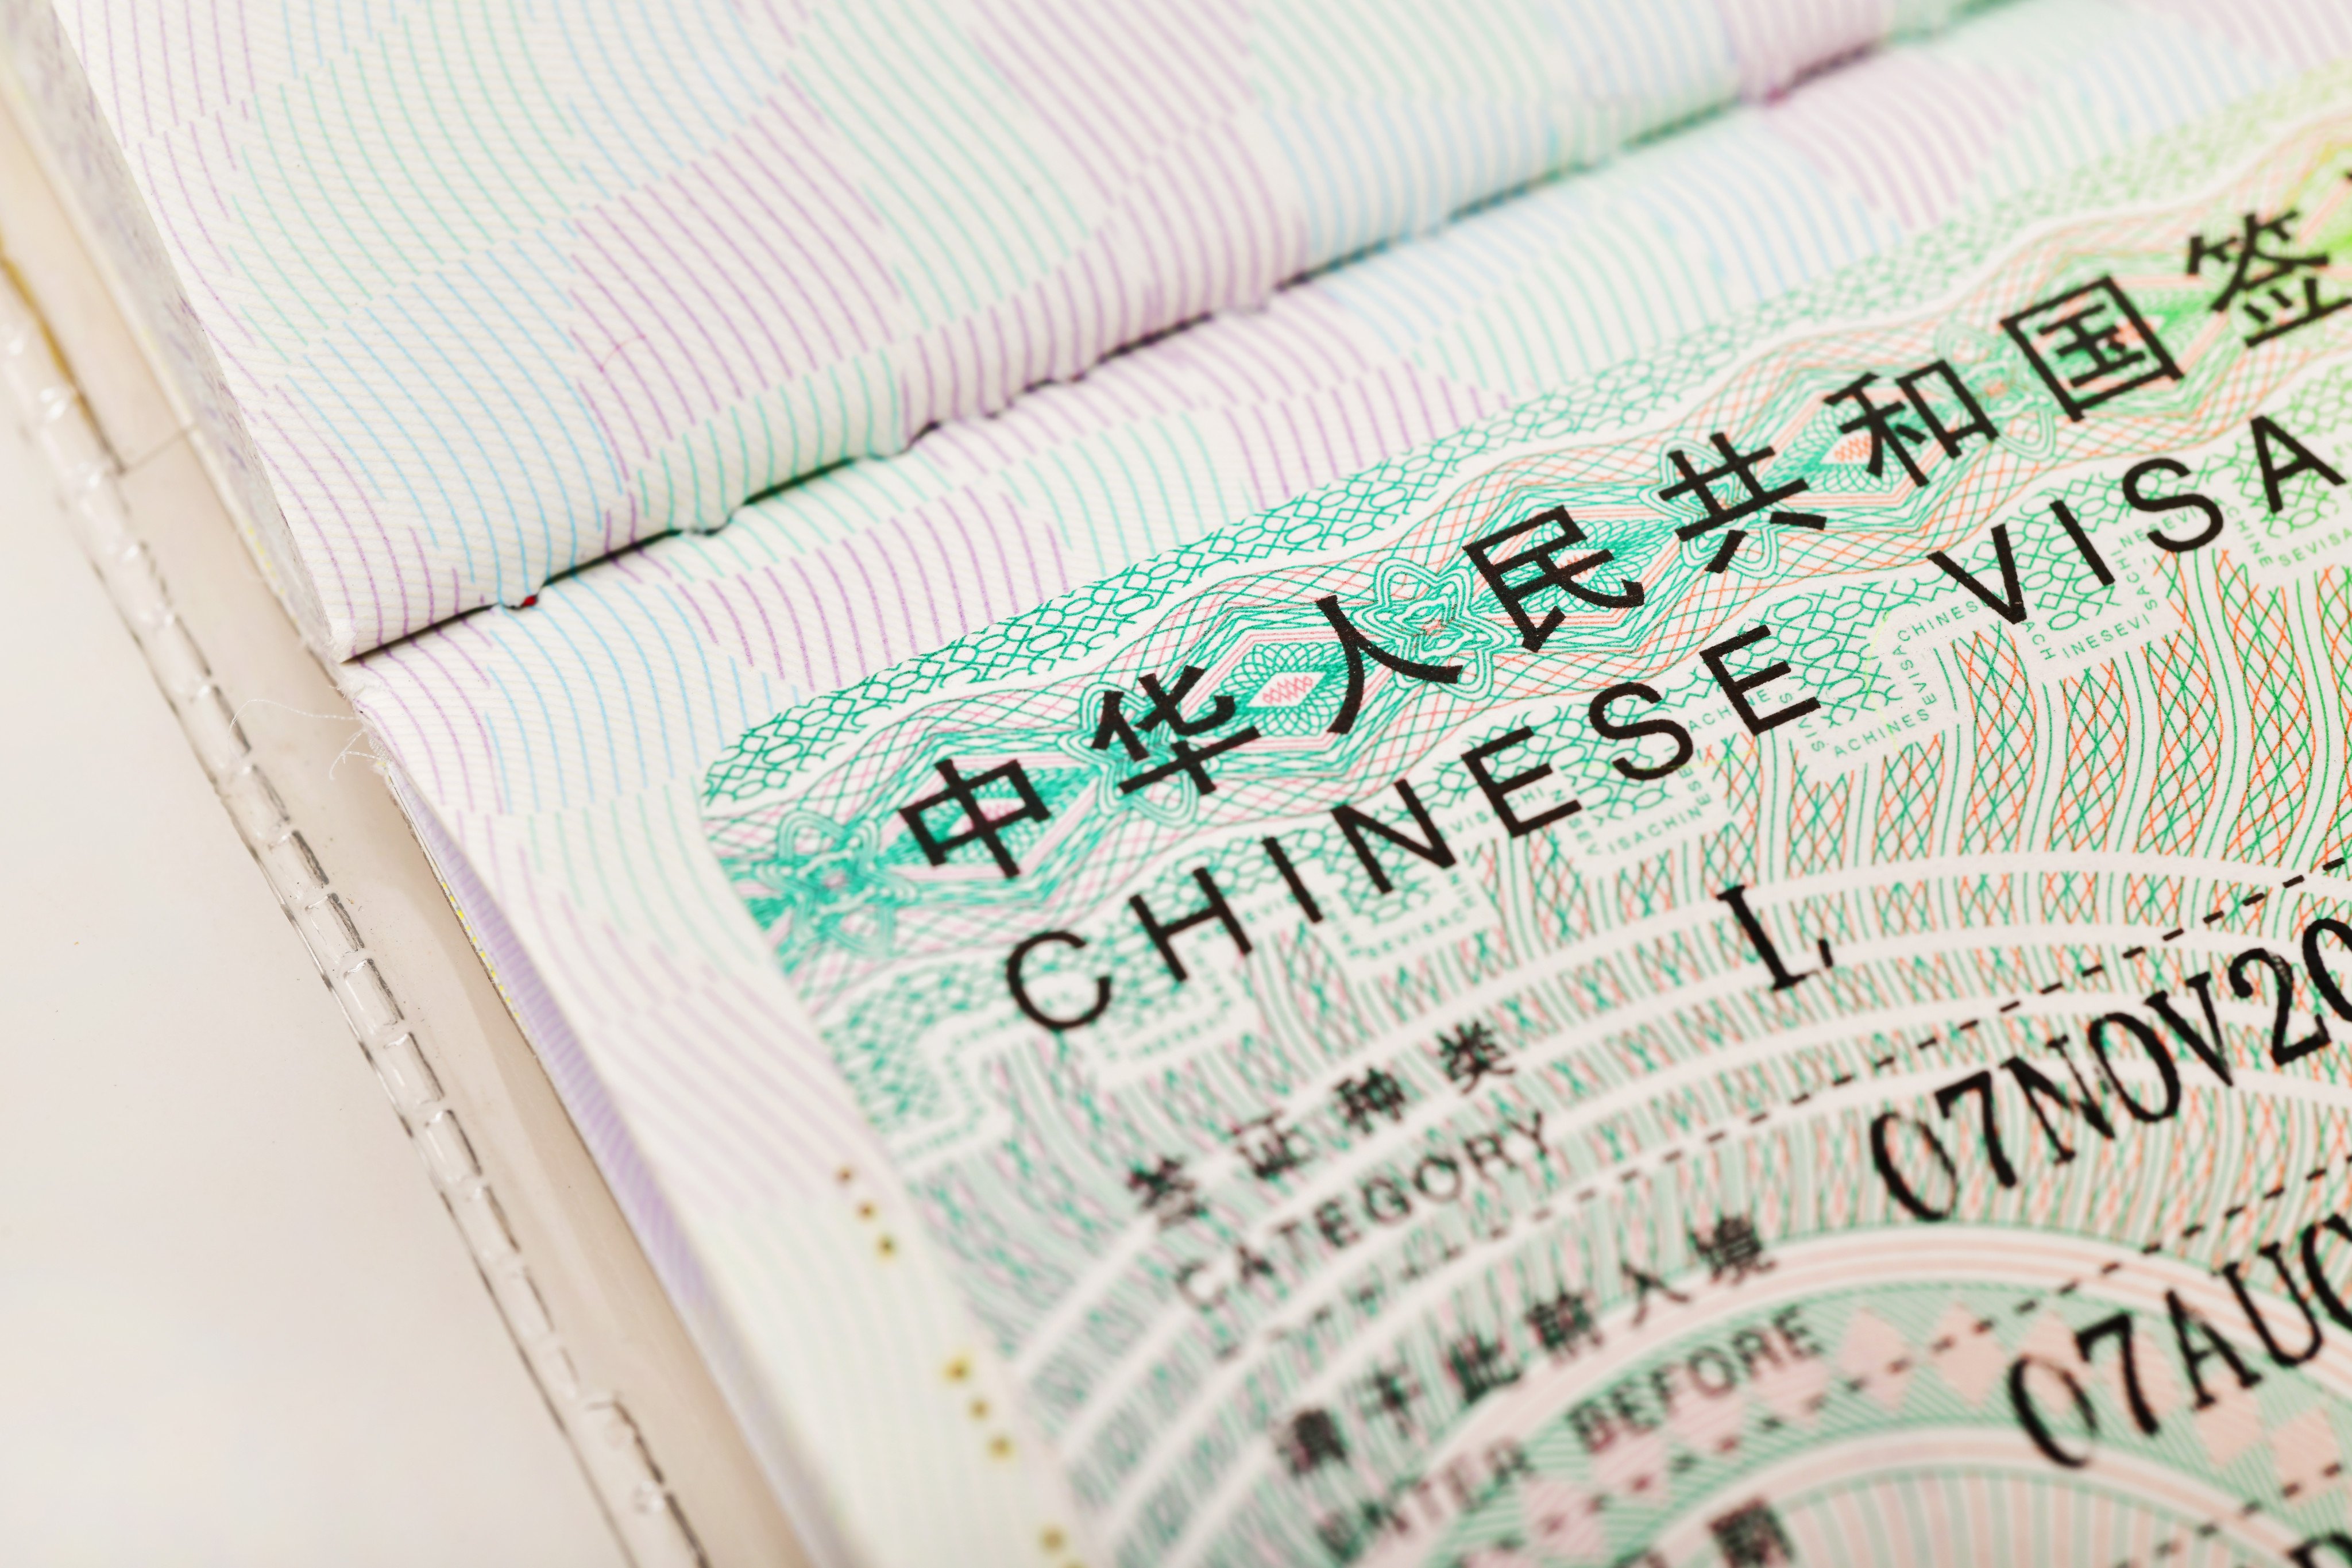 Applying for a China tourist visa in 2023 is no walk in the park — be prepared for lengthy forms, photo issues and in-person appointments. Photo: Shutterstock